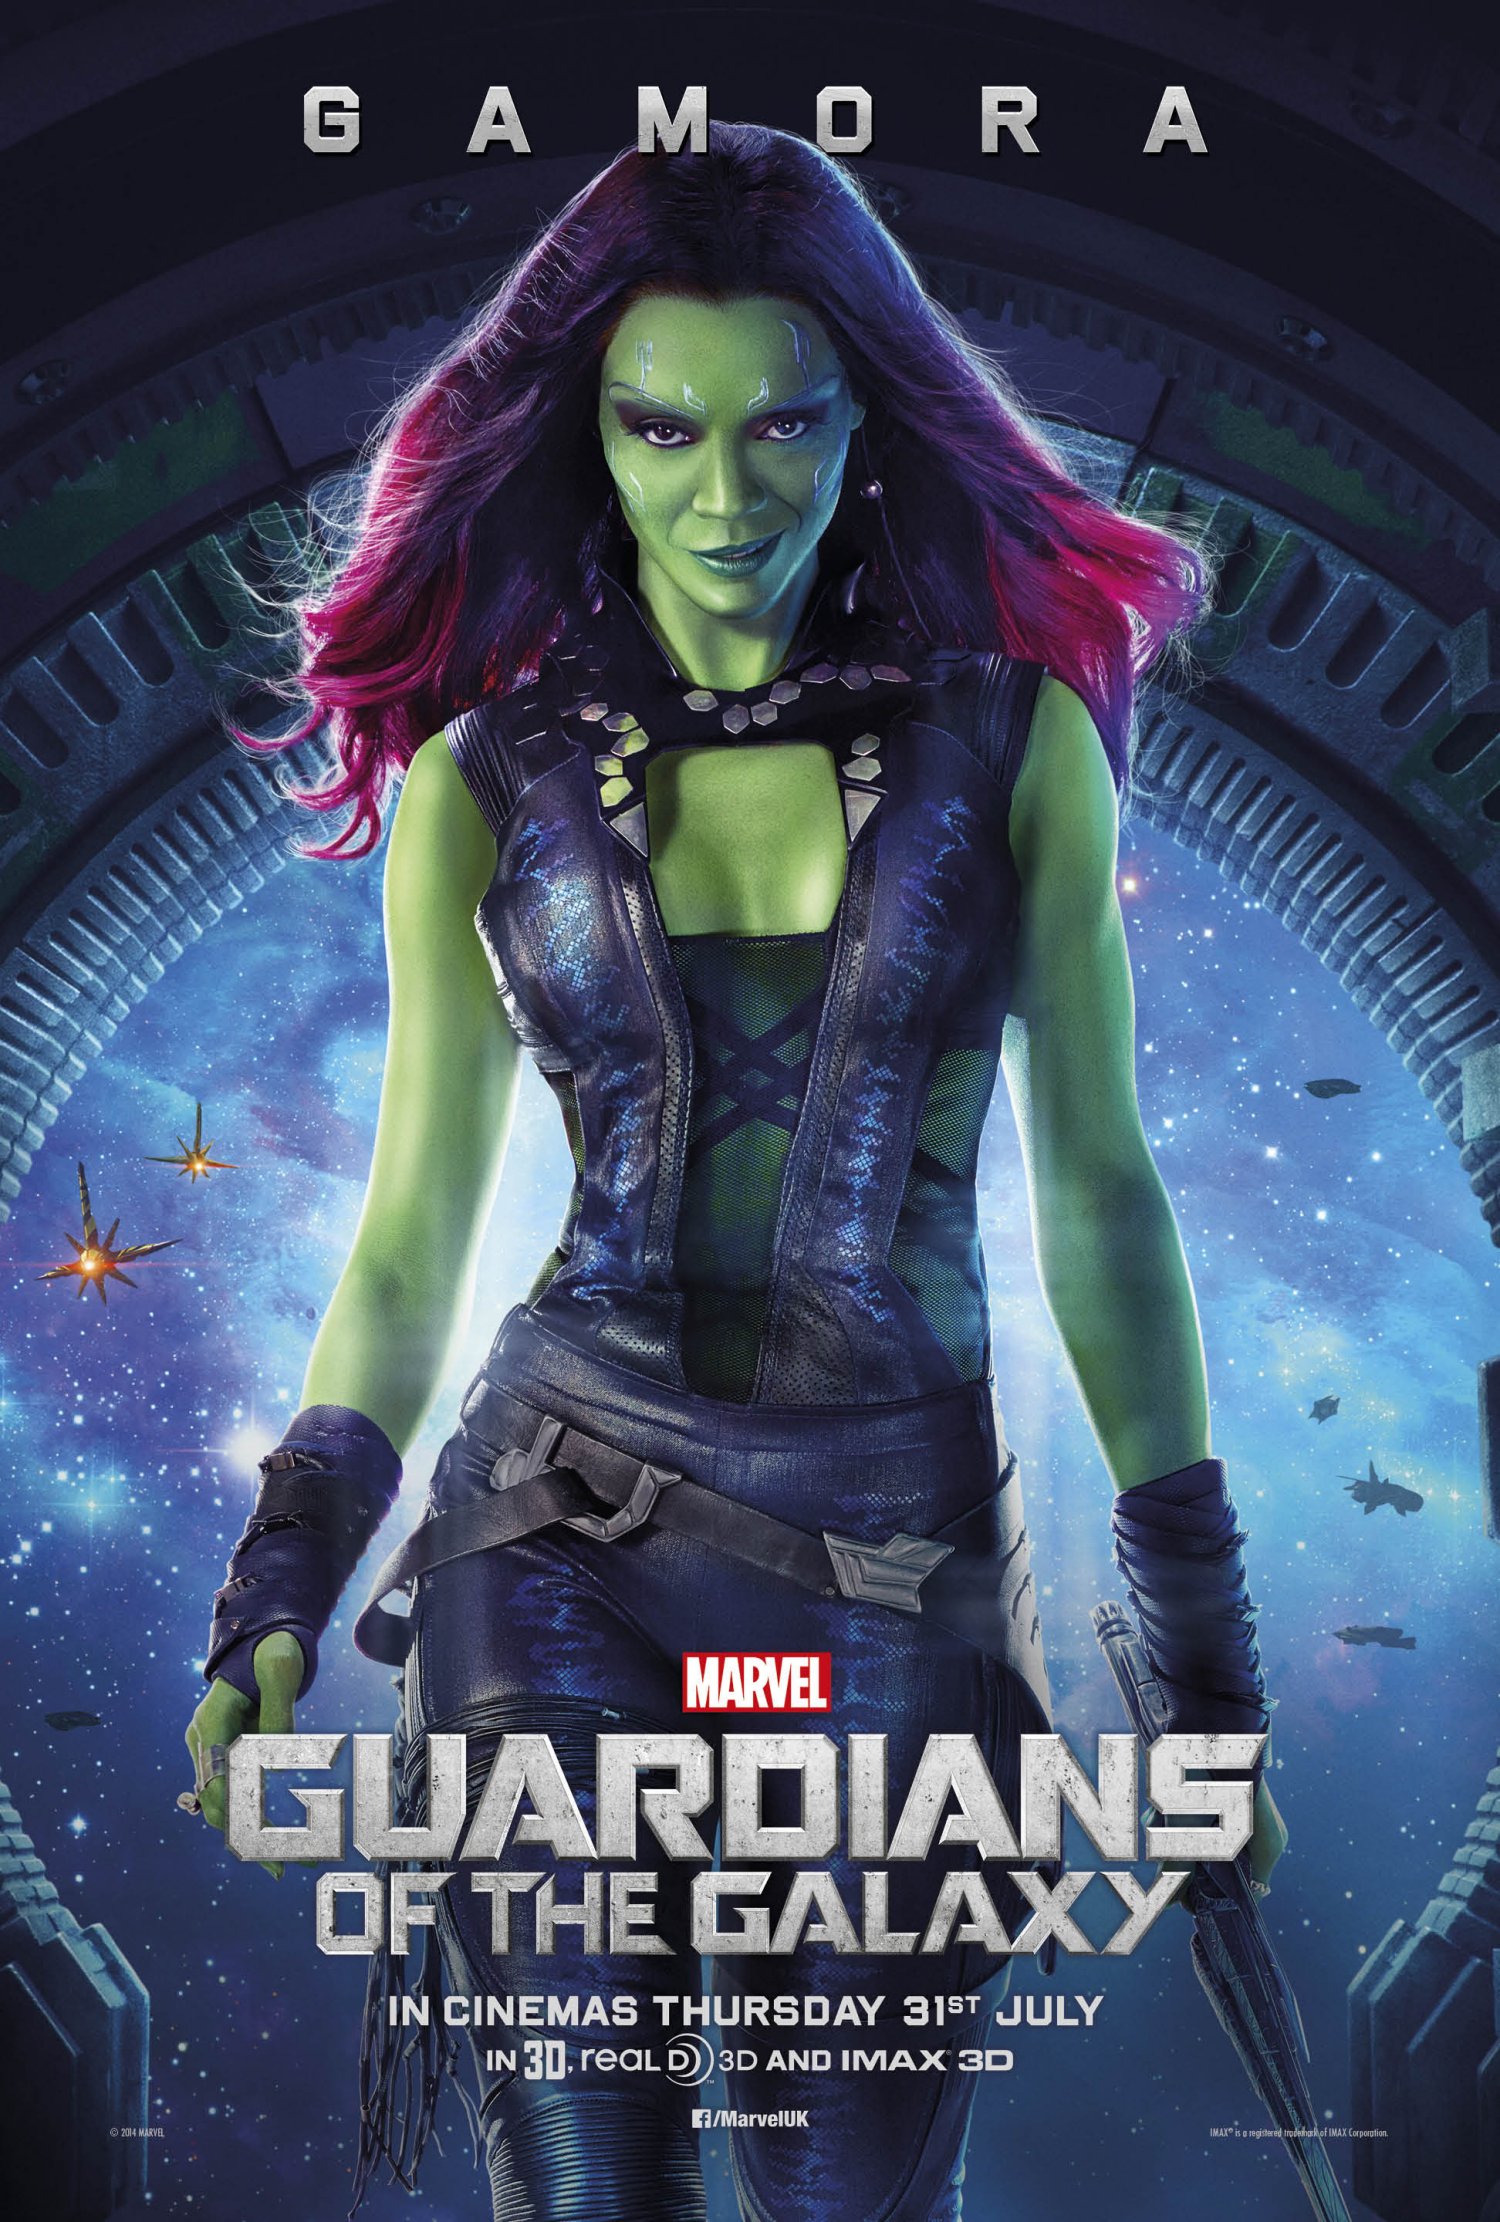 Guardians of the Galaxy – Gamora poster